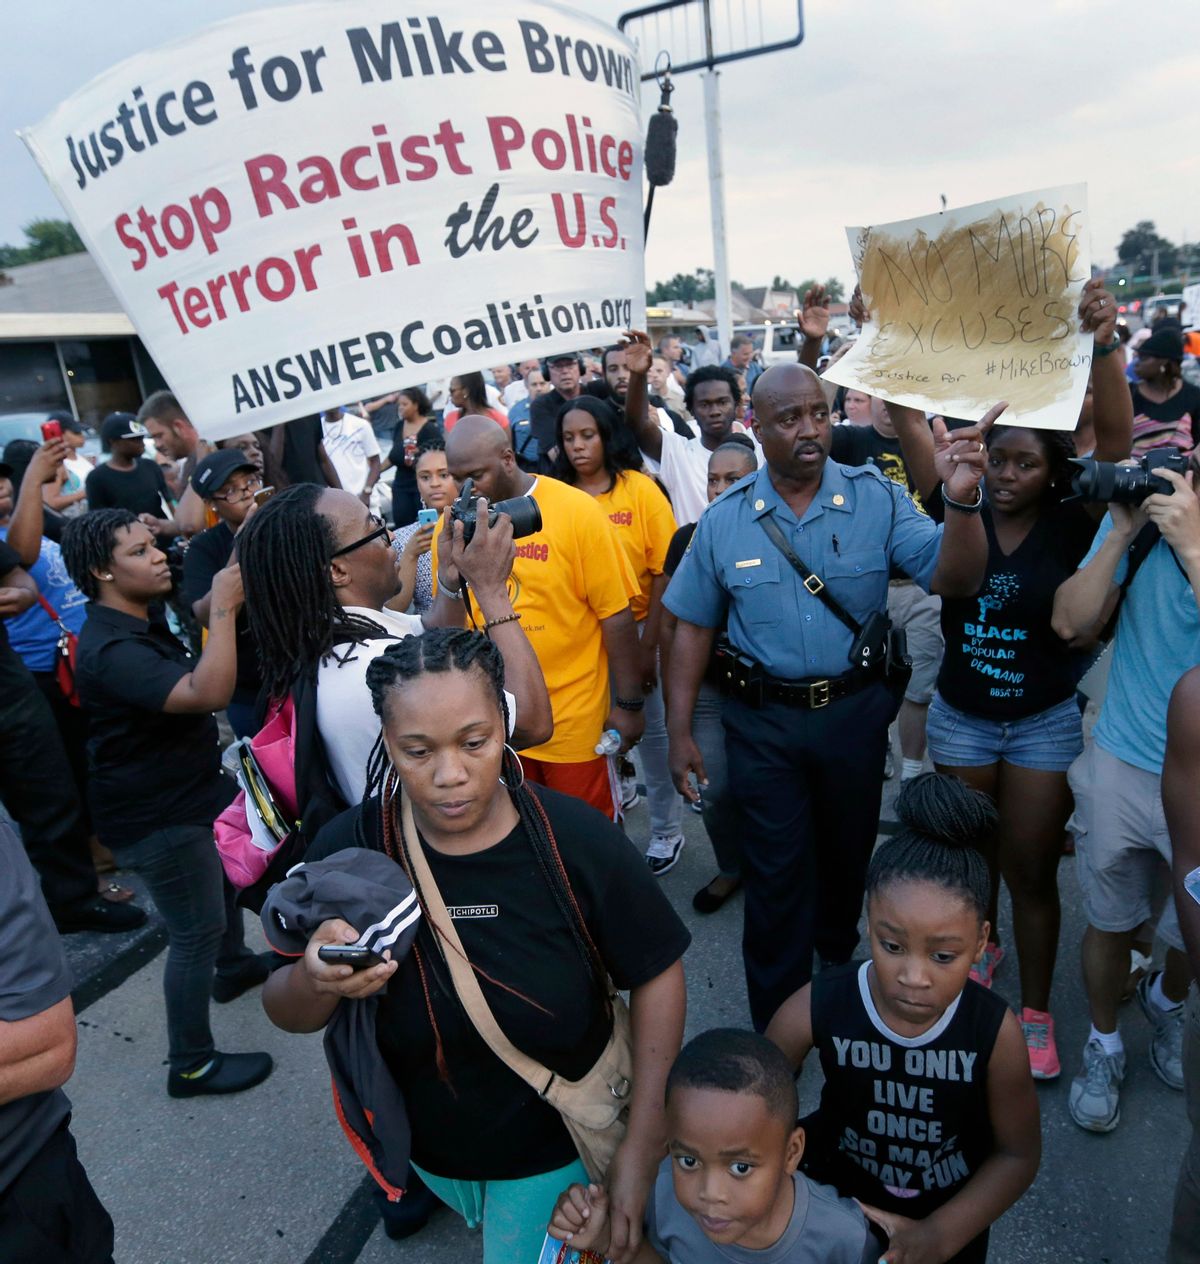 In this Aug, 16, 2014 file photo, Missouri Highway Patrol Capt. Ron Johnson walks among people protesting the police shooting death of Michael Brown a week ago in Ferguson, Mo. The Ferguson City Council, set to meet Tuesday, Sept. 9, 2014, for the first time since the fatal shooting of Brown, said it plans to establish a review board to help guide the police department and make other changes aimed at improving community relations.   (AP/Charlie Riedel)